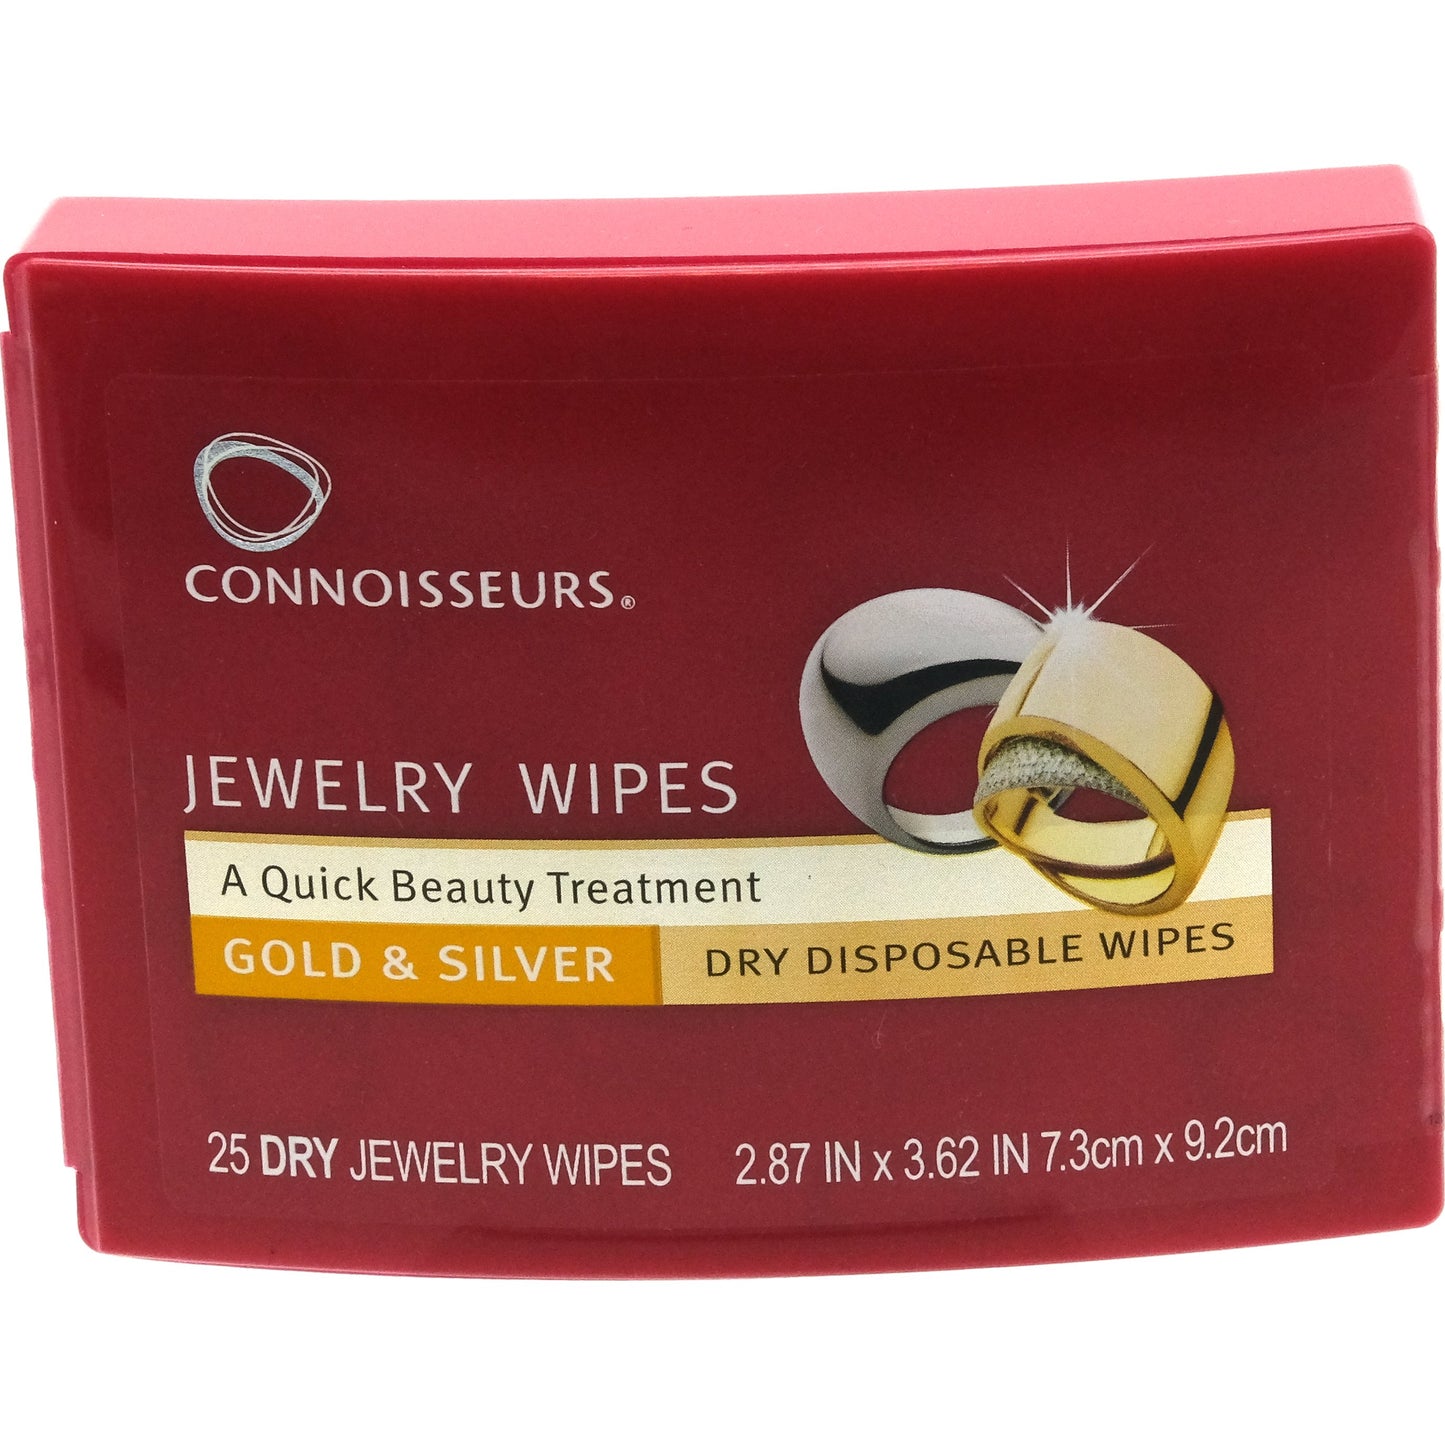 Connoisseurs Jewelry Wipes 25 Wipes